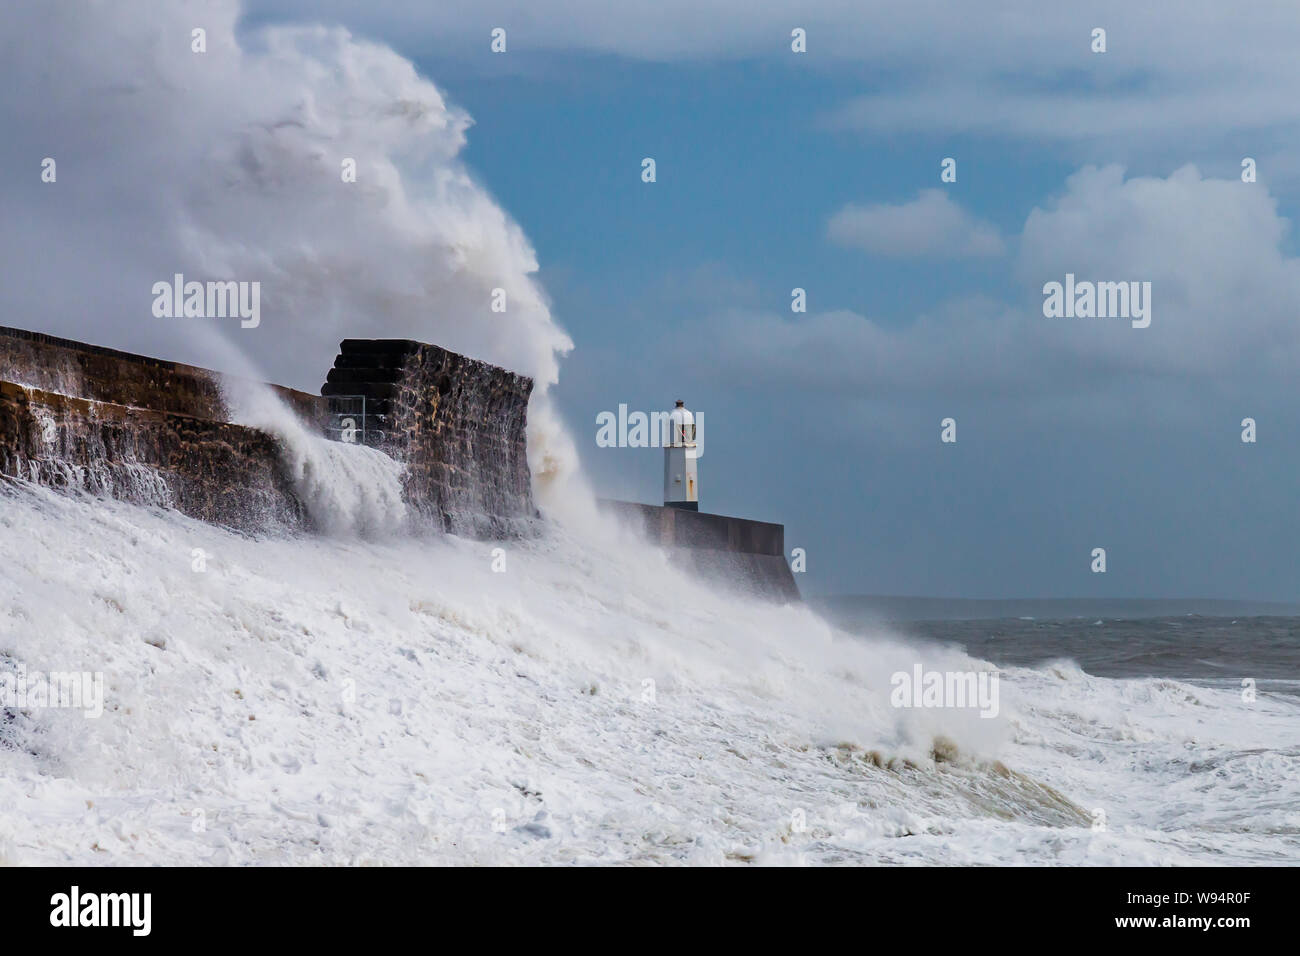 Huge ocean waves crashing into a sea wall and lighthouse (Porthcawl, South Wales, UK) Stock Photo